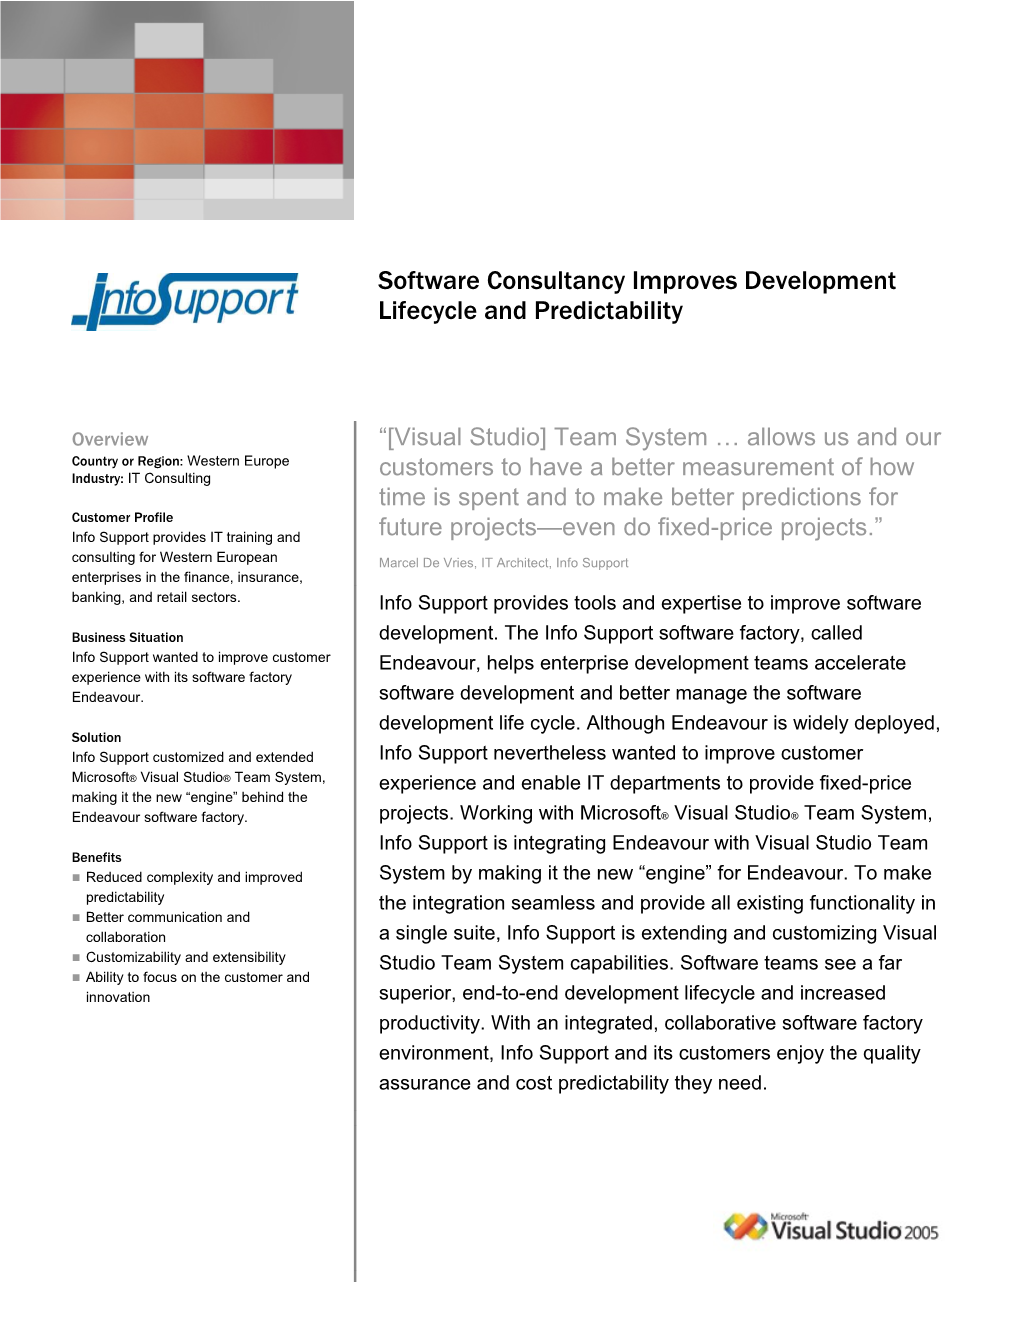 Software Consultancy Improves Development Lifecycle and Predictability